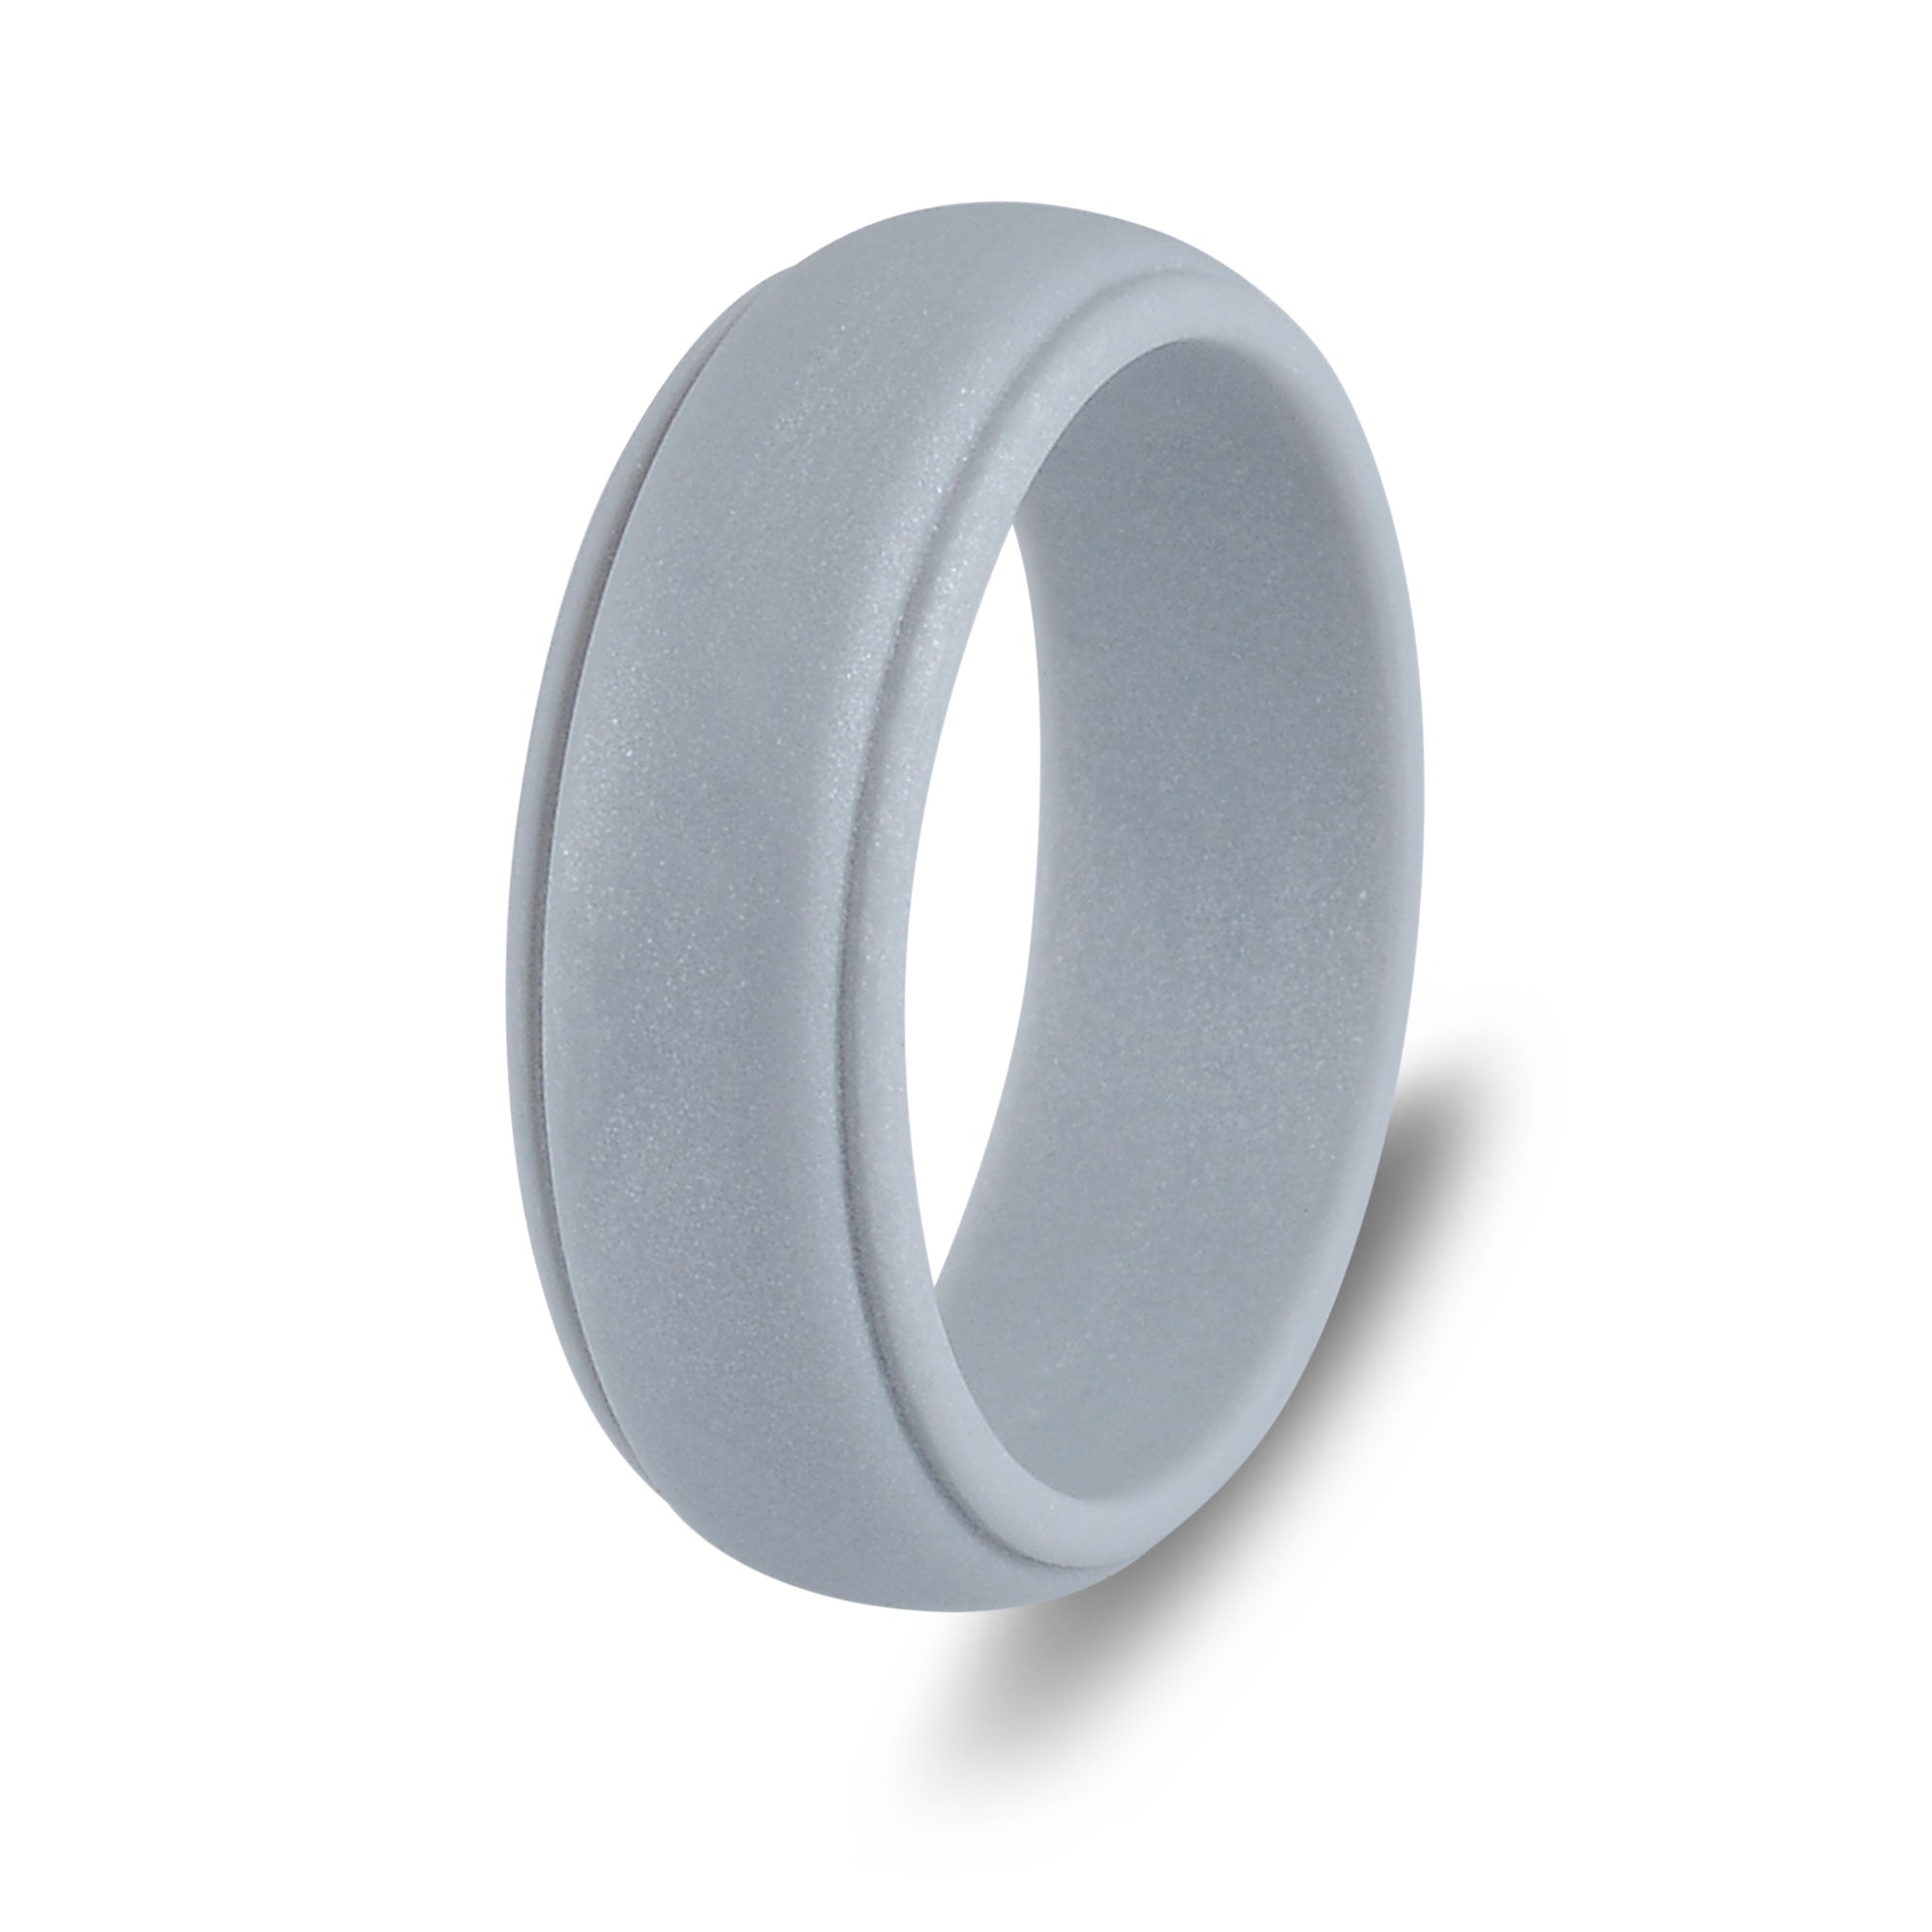 The Mist - Silicone Ring